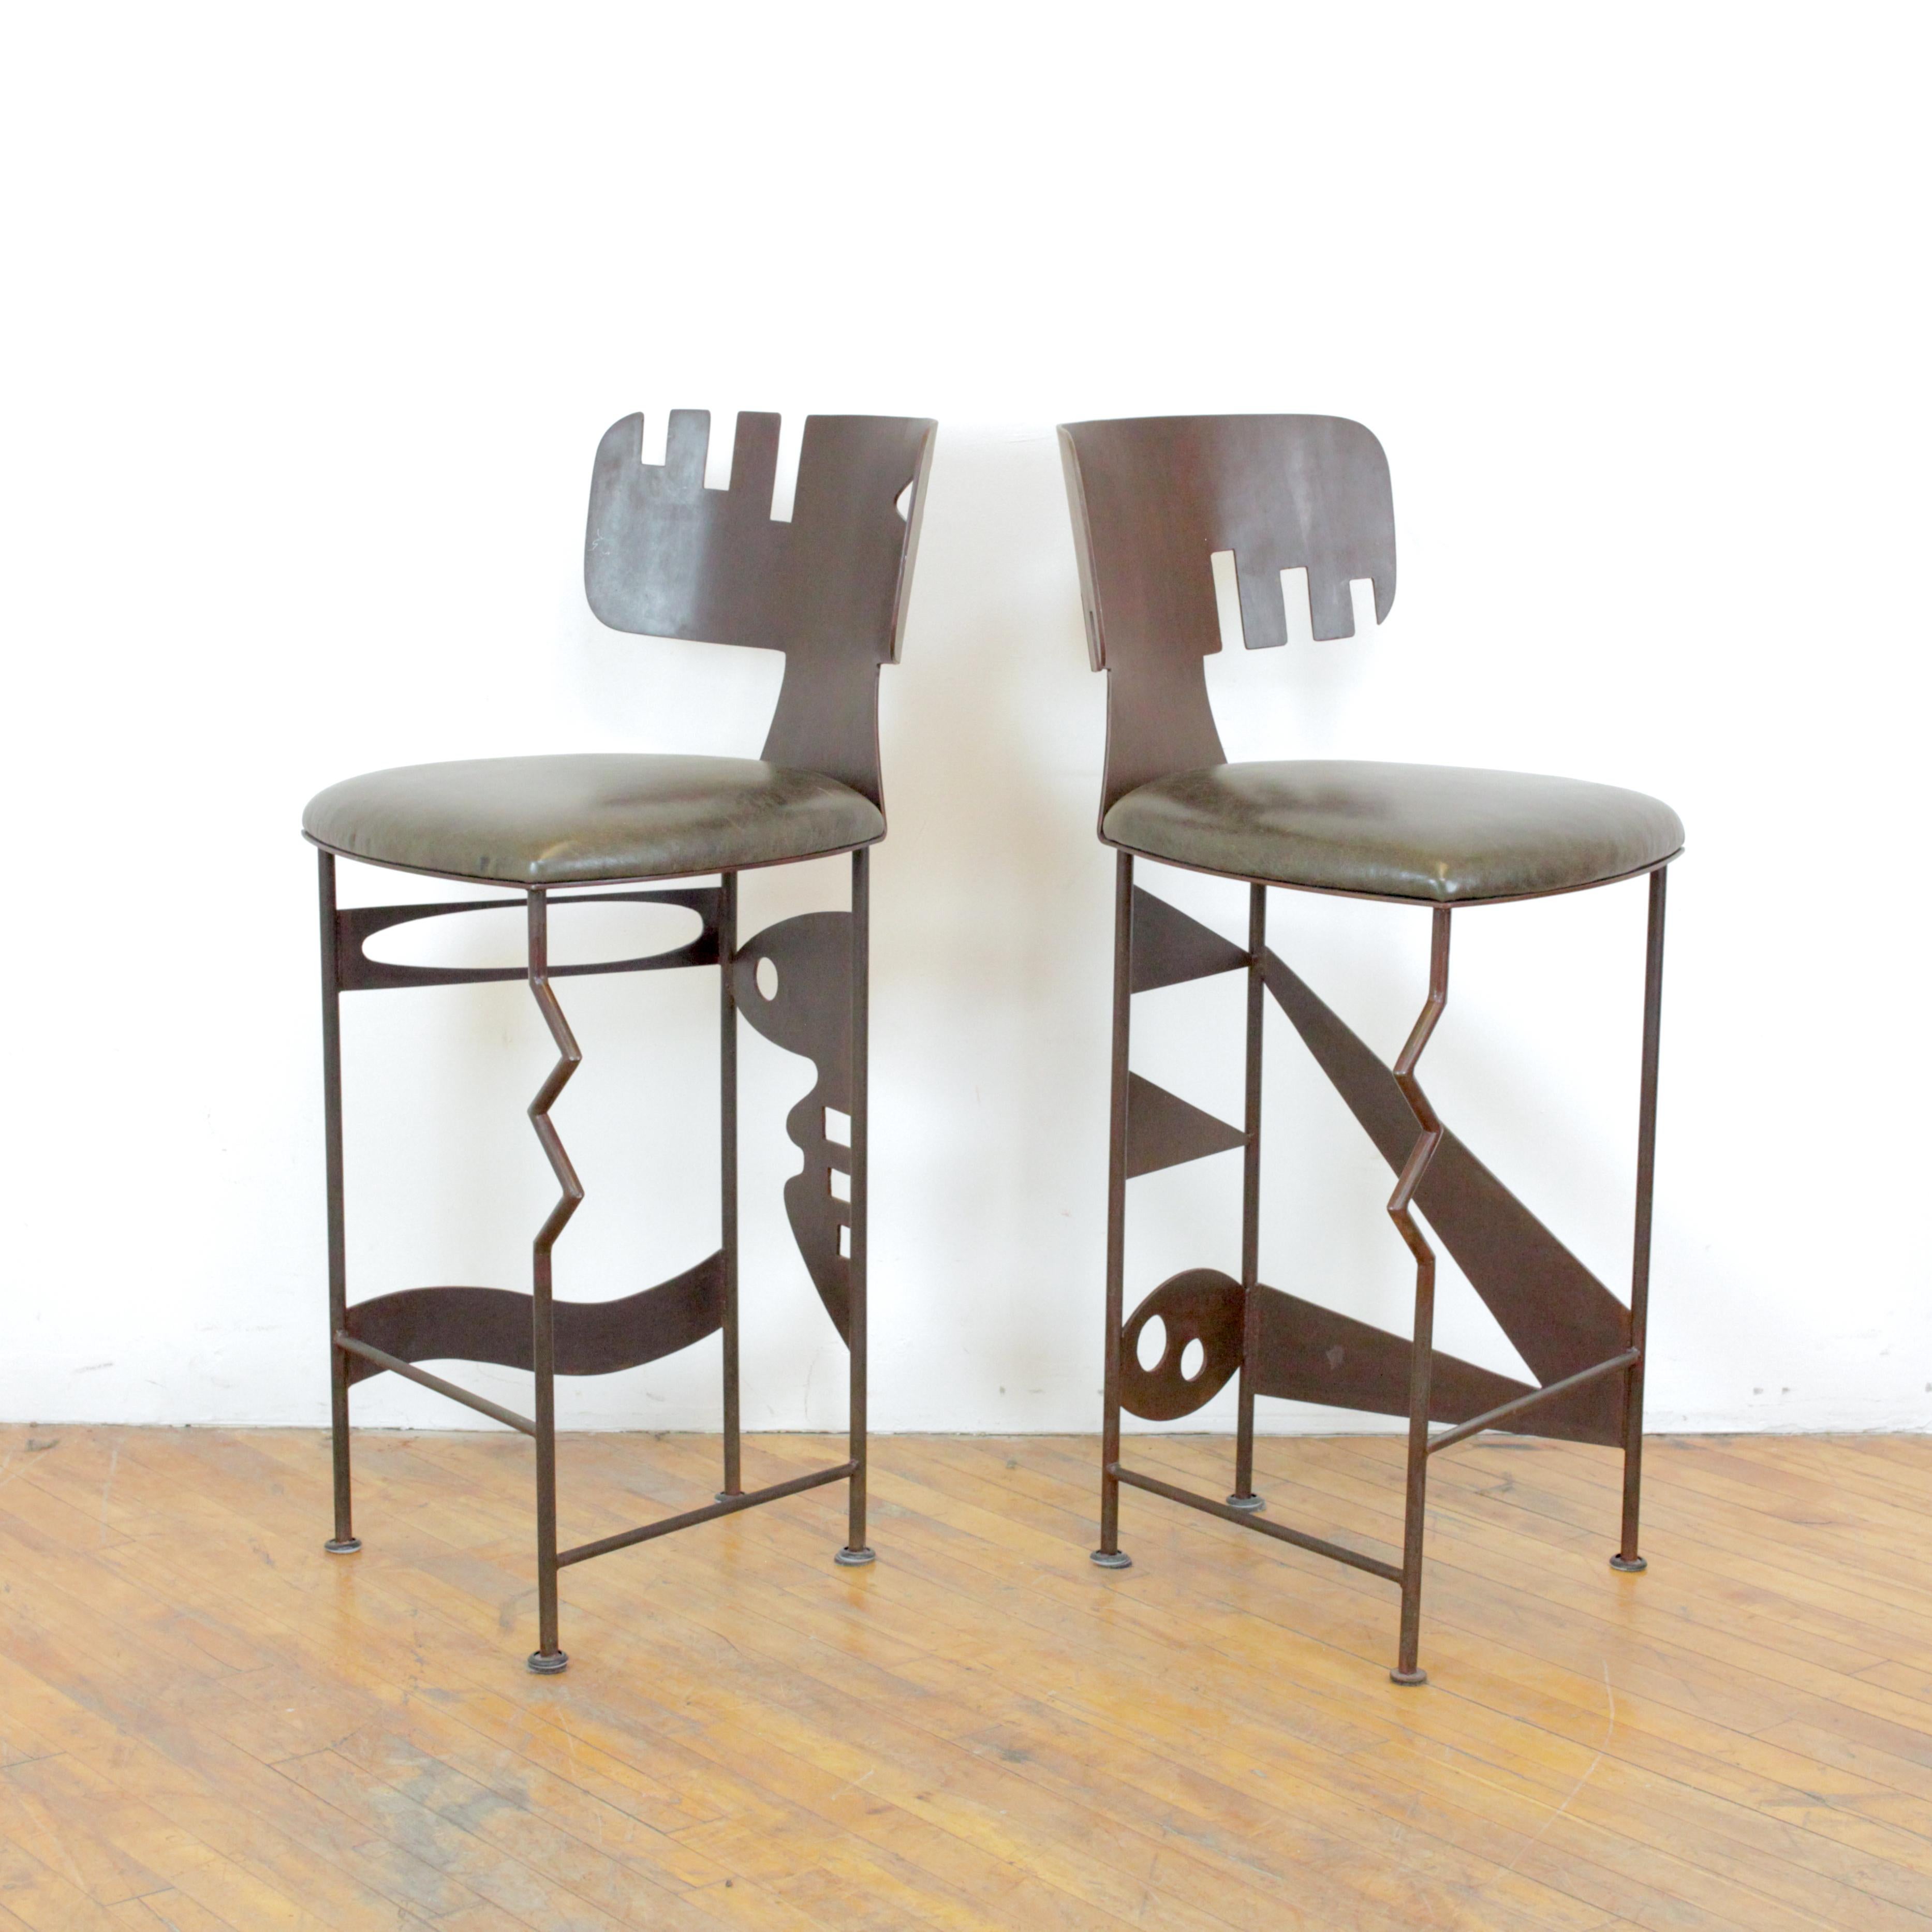 Post-Modern Pair of Gregory Hawthorne Sculptural Stools For Sale